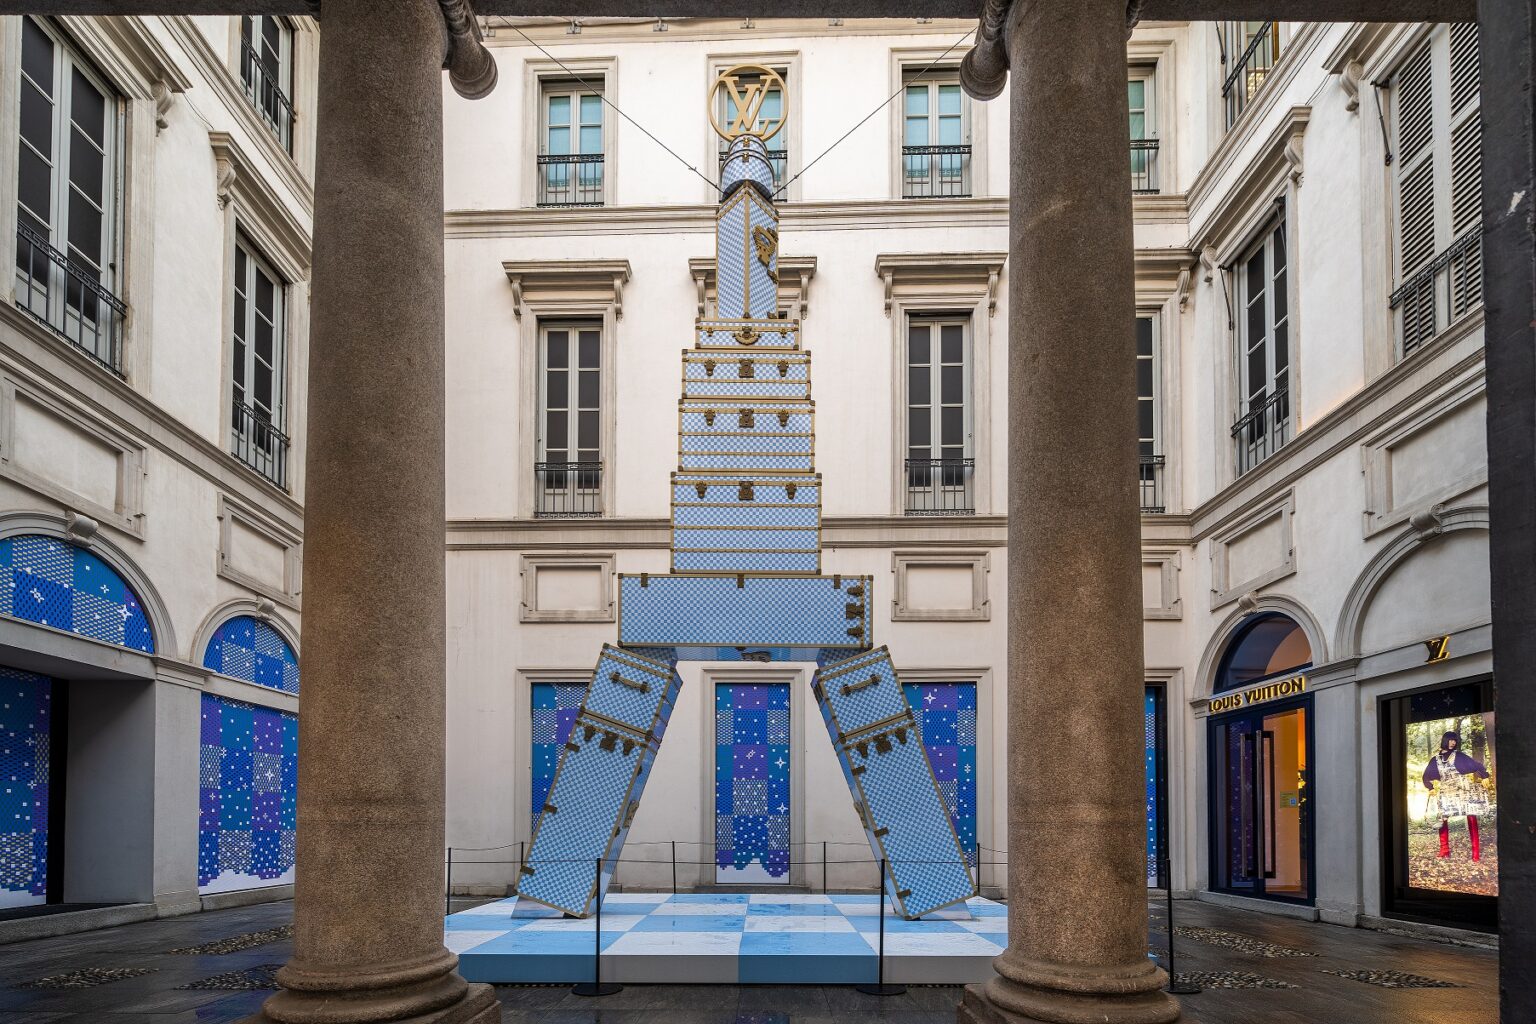 Louis Vuitton and Lego Builders join forces for Christmas shop